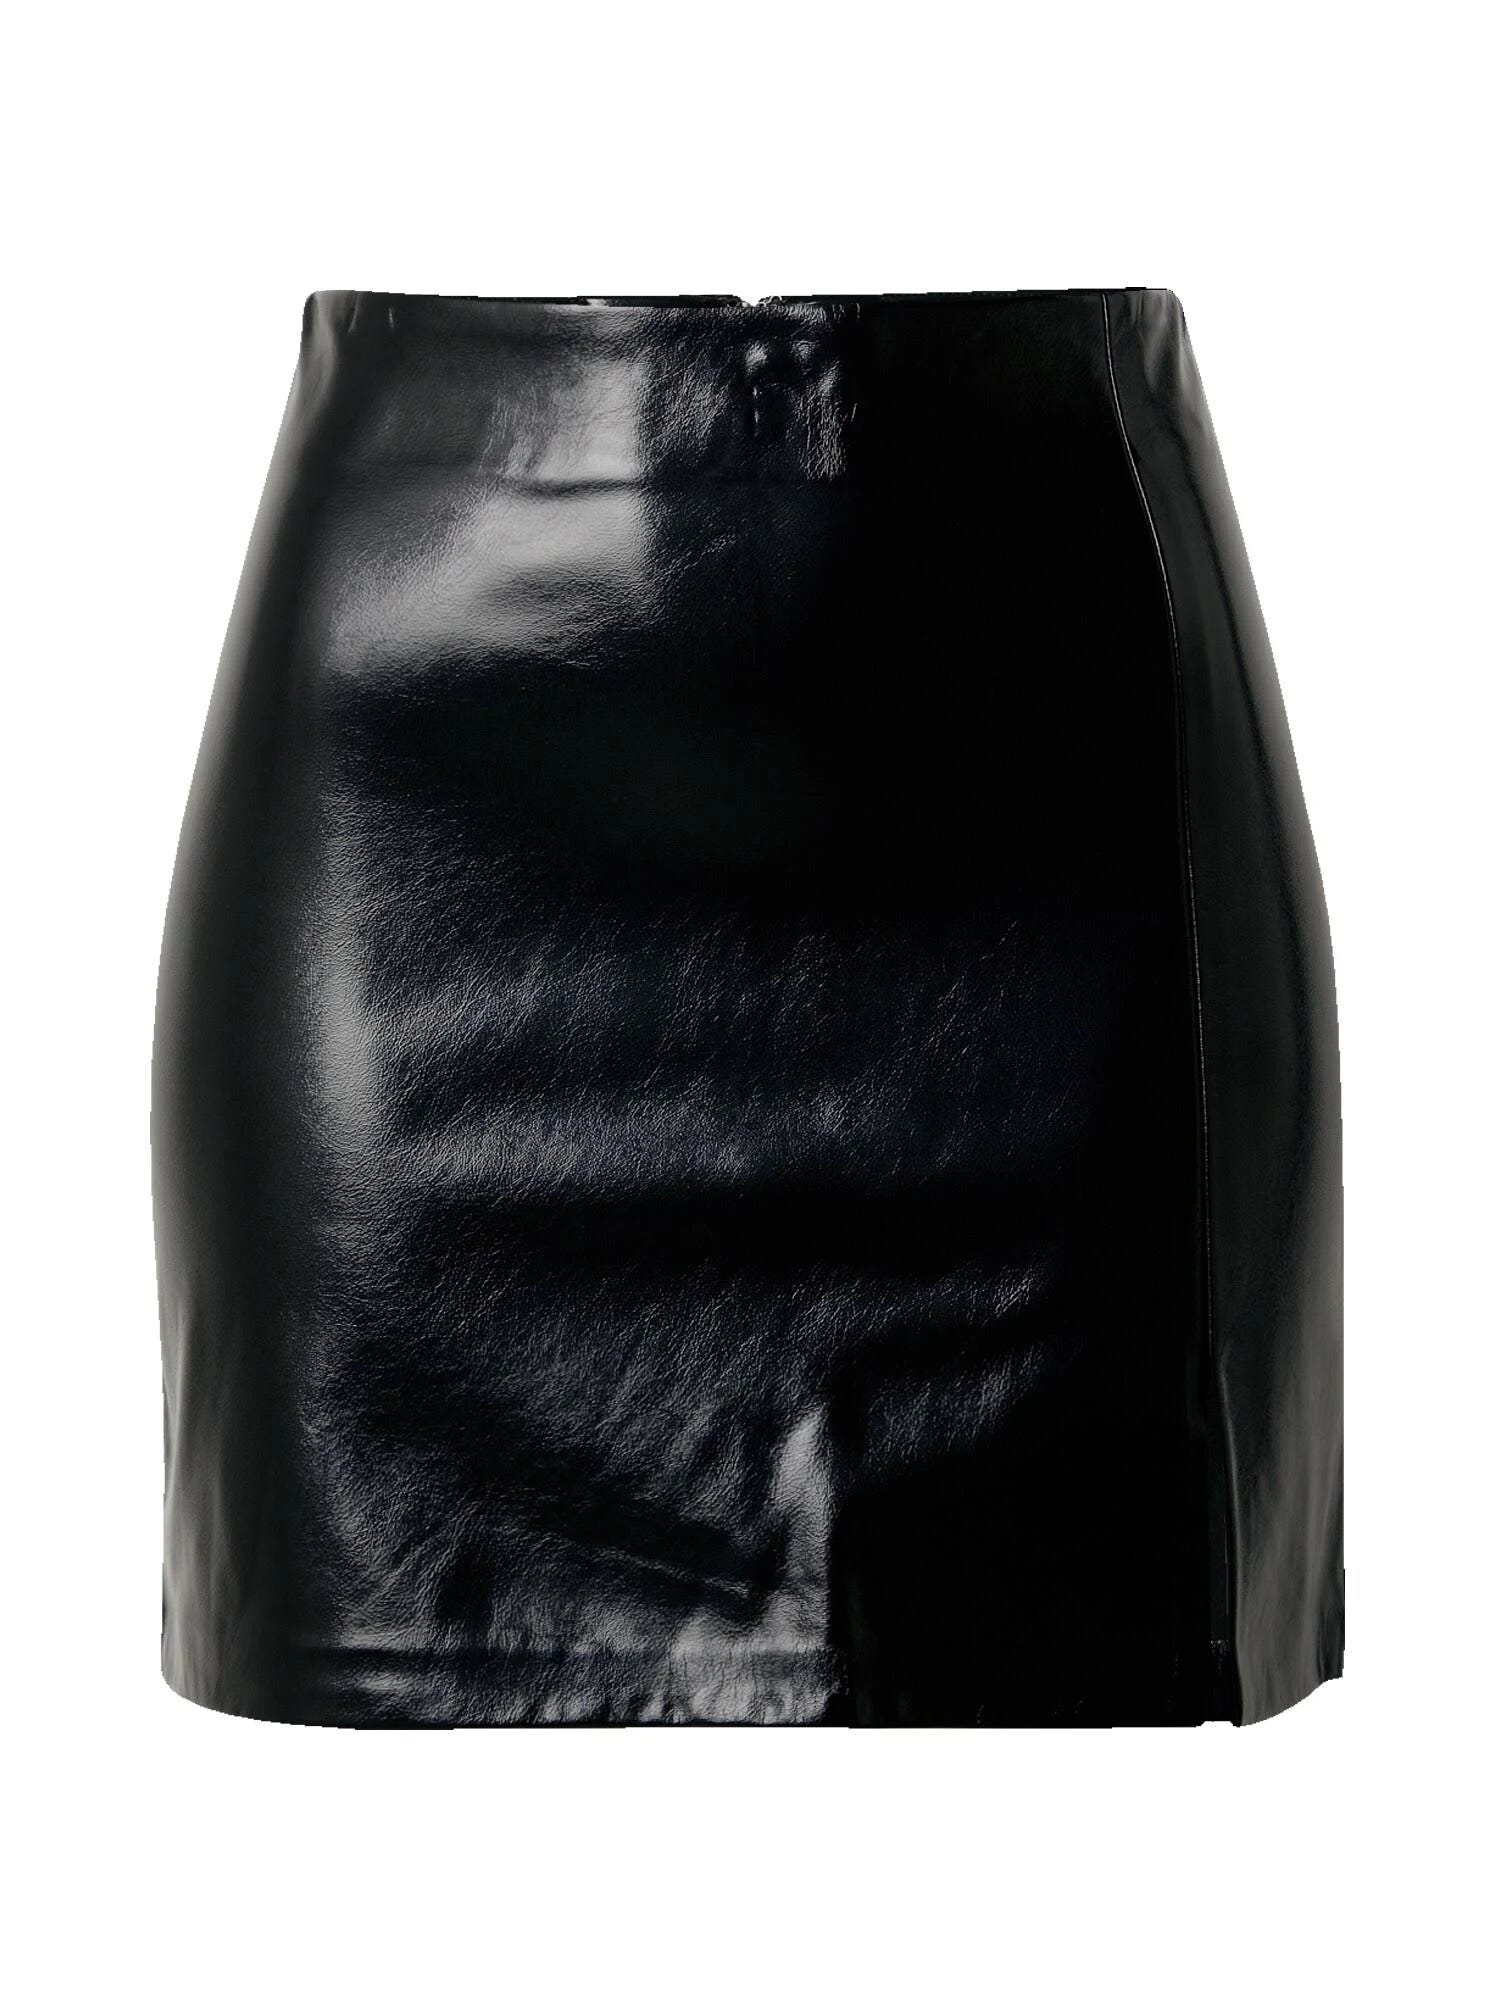 Classic black leather miniskirt with slit detail - Nordstrom Size 4 US | Image